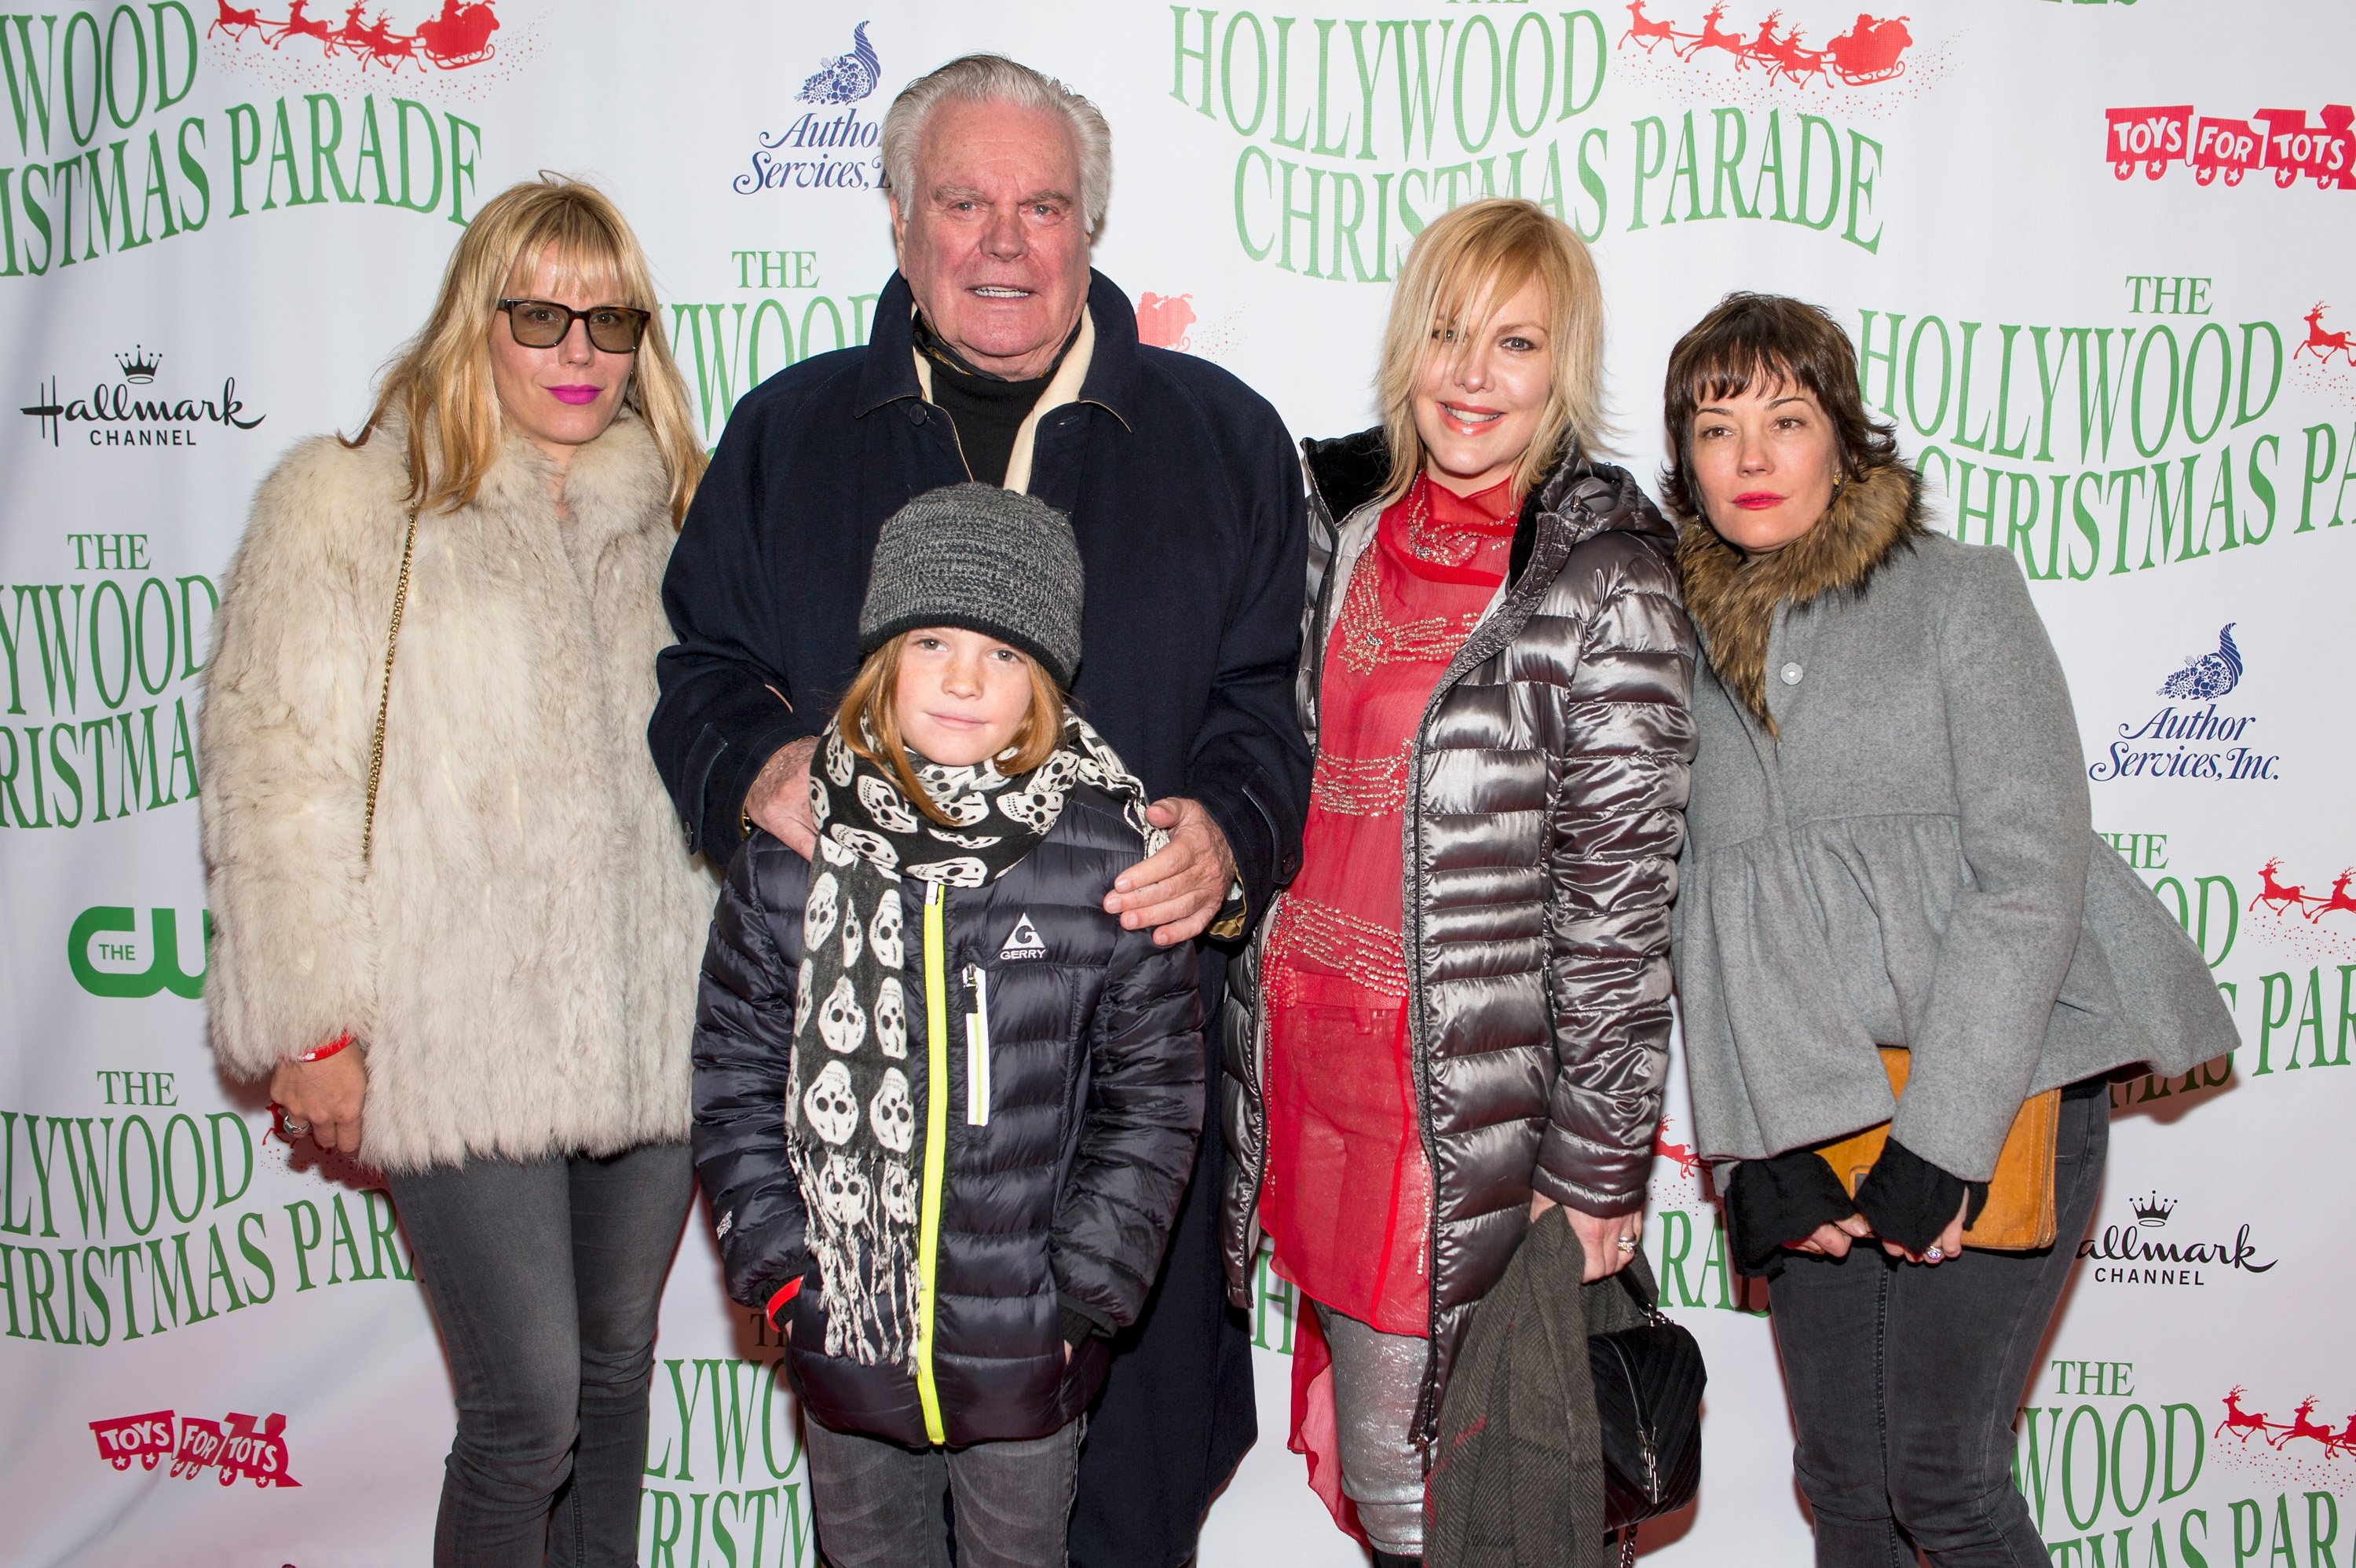 Robert Wagner with daughters Katie Wagner and Natasha Gregson Wagner and family attending the 85th Annual Hollywood Christmas Parade on November 27, 2016 in Hollywood, California ┃Source: Getty Images